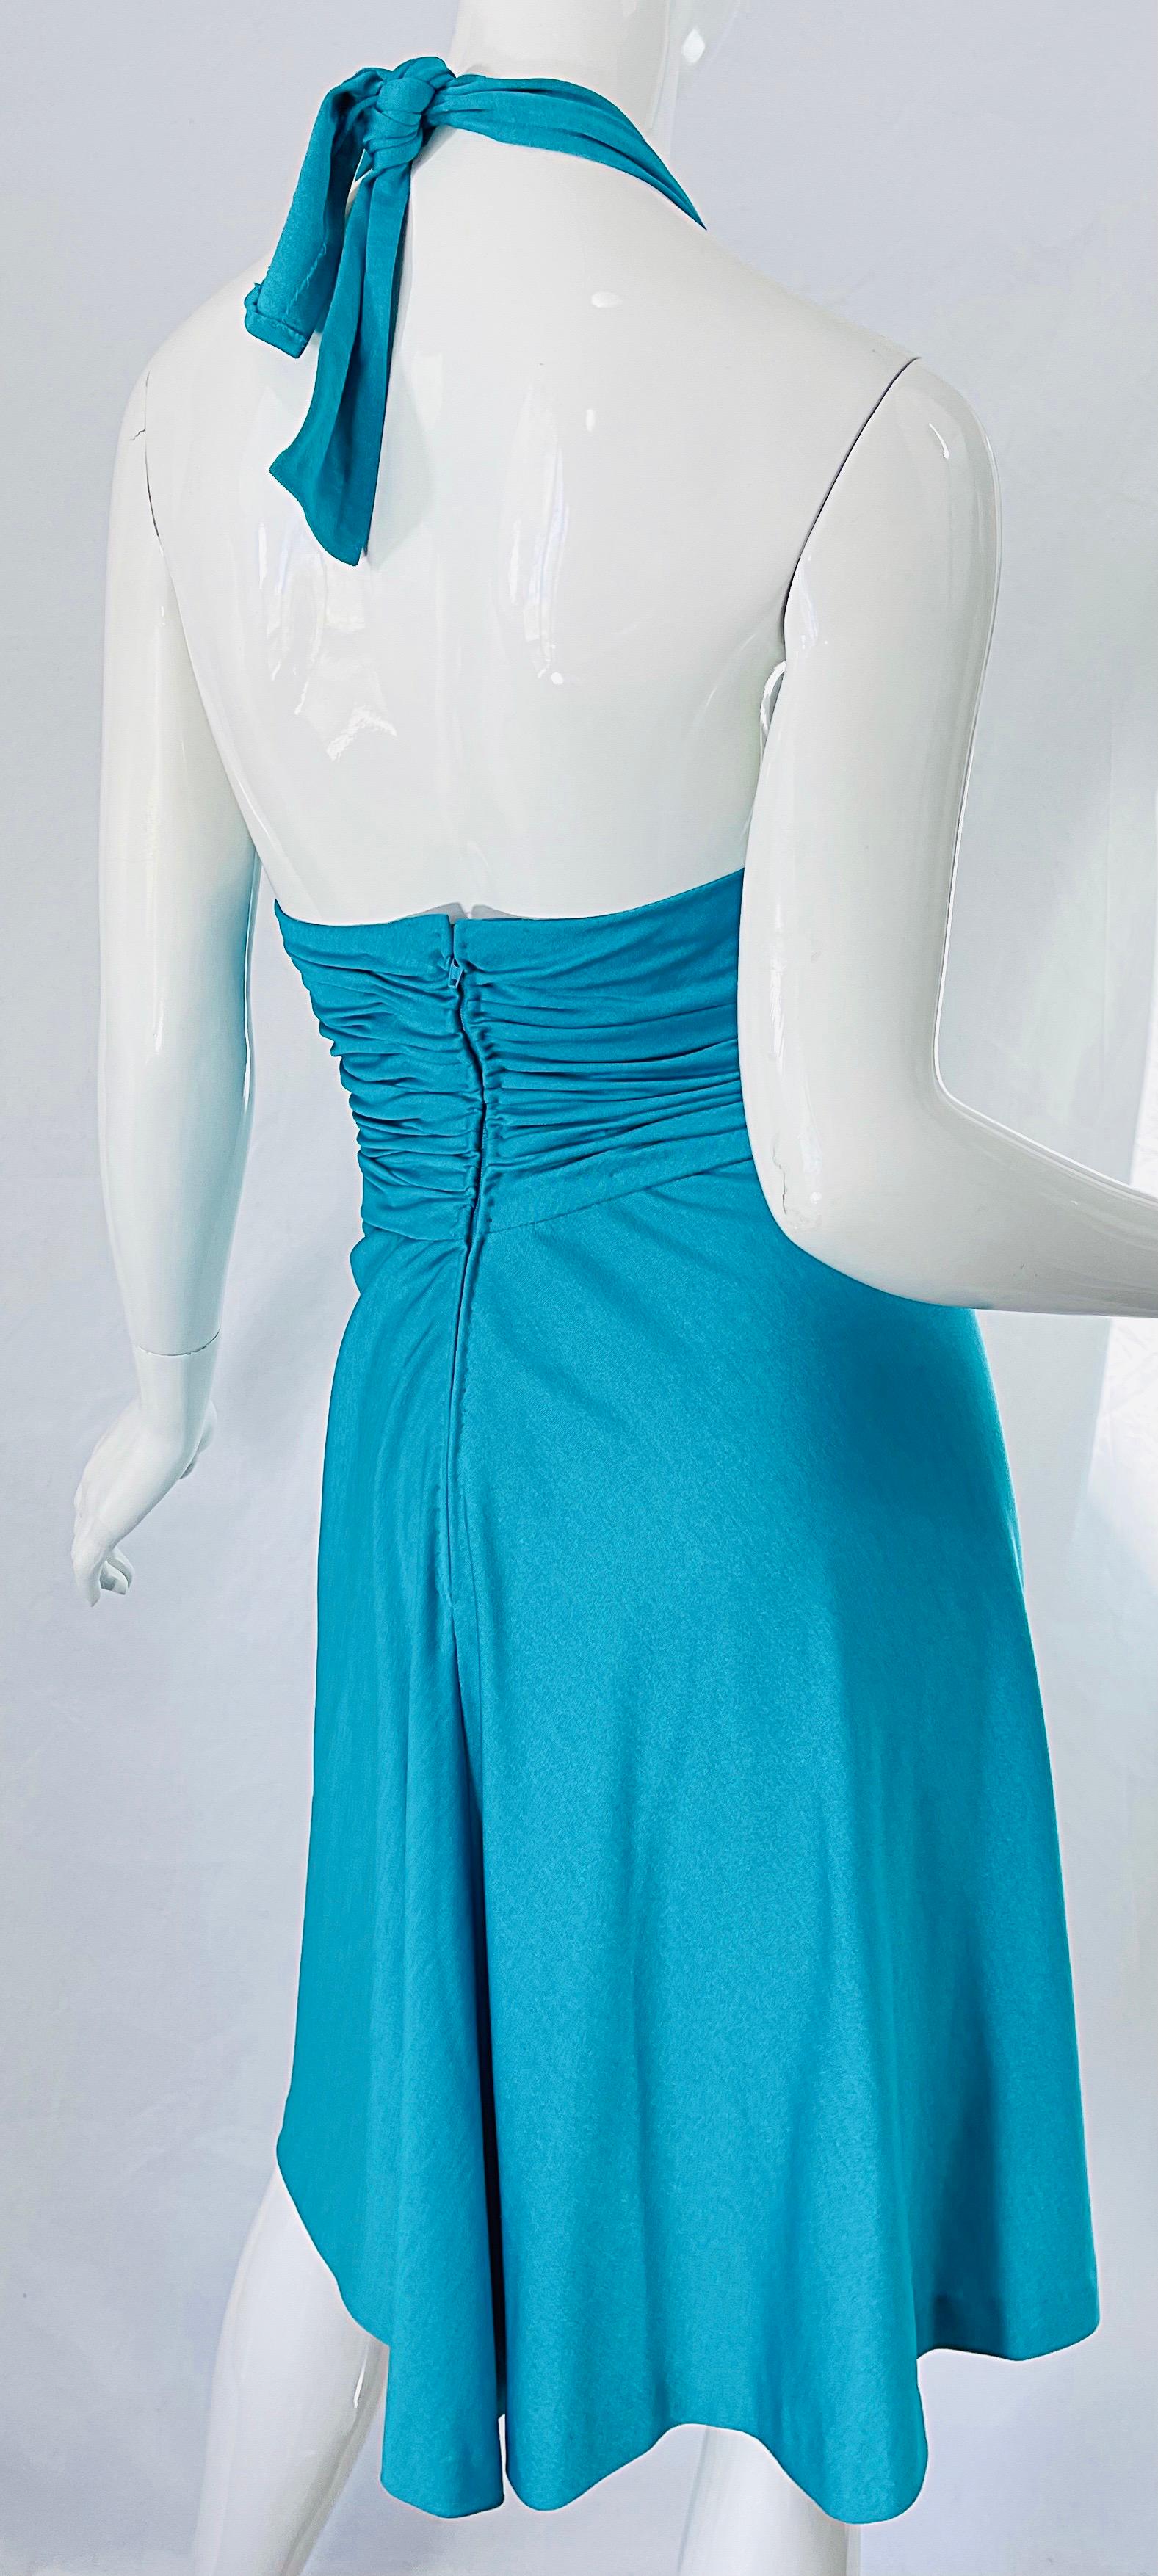 1970s Loris Azzaro Couture Turquoise Blue Silk Jersey Rhinestone Vintage Dress For Sale 3